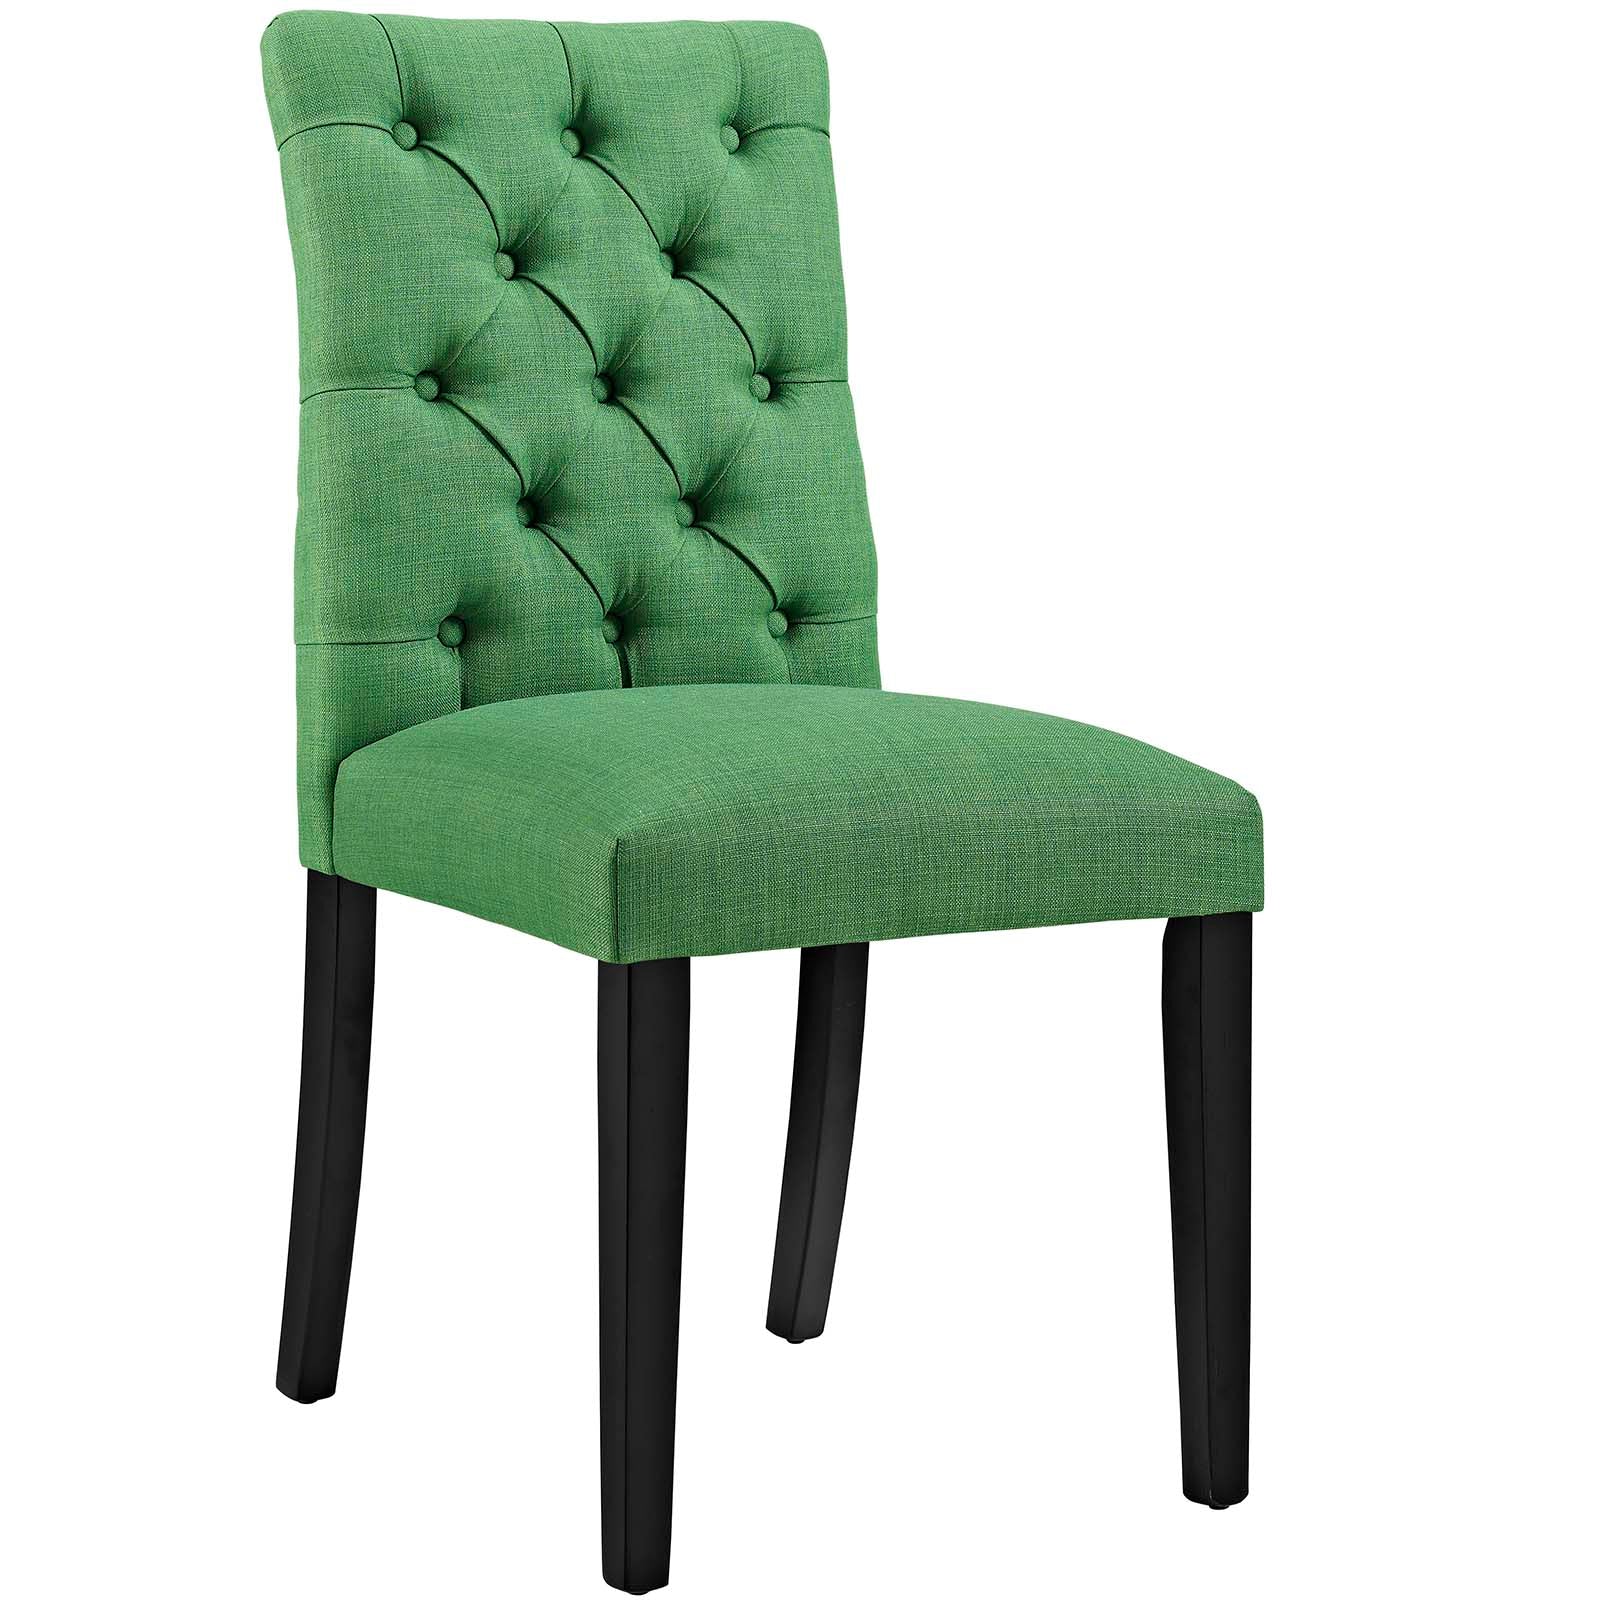 Modway Dining Chairs - Duchess Fabric Dining Chair Kelly Green